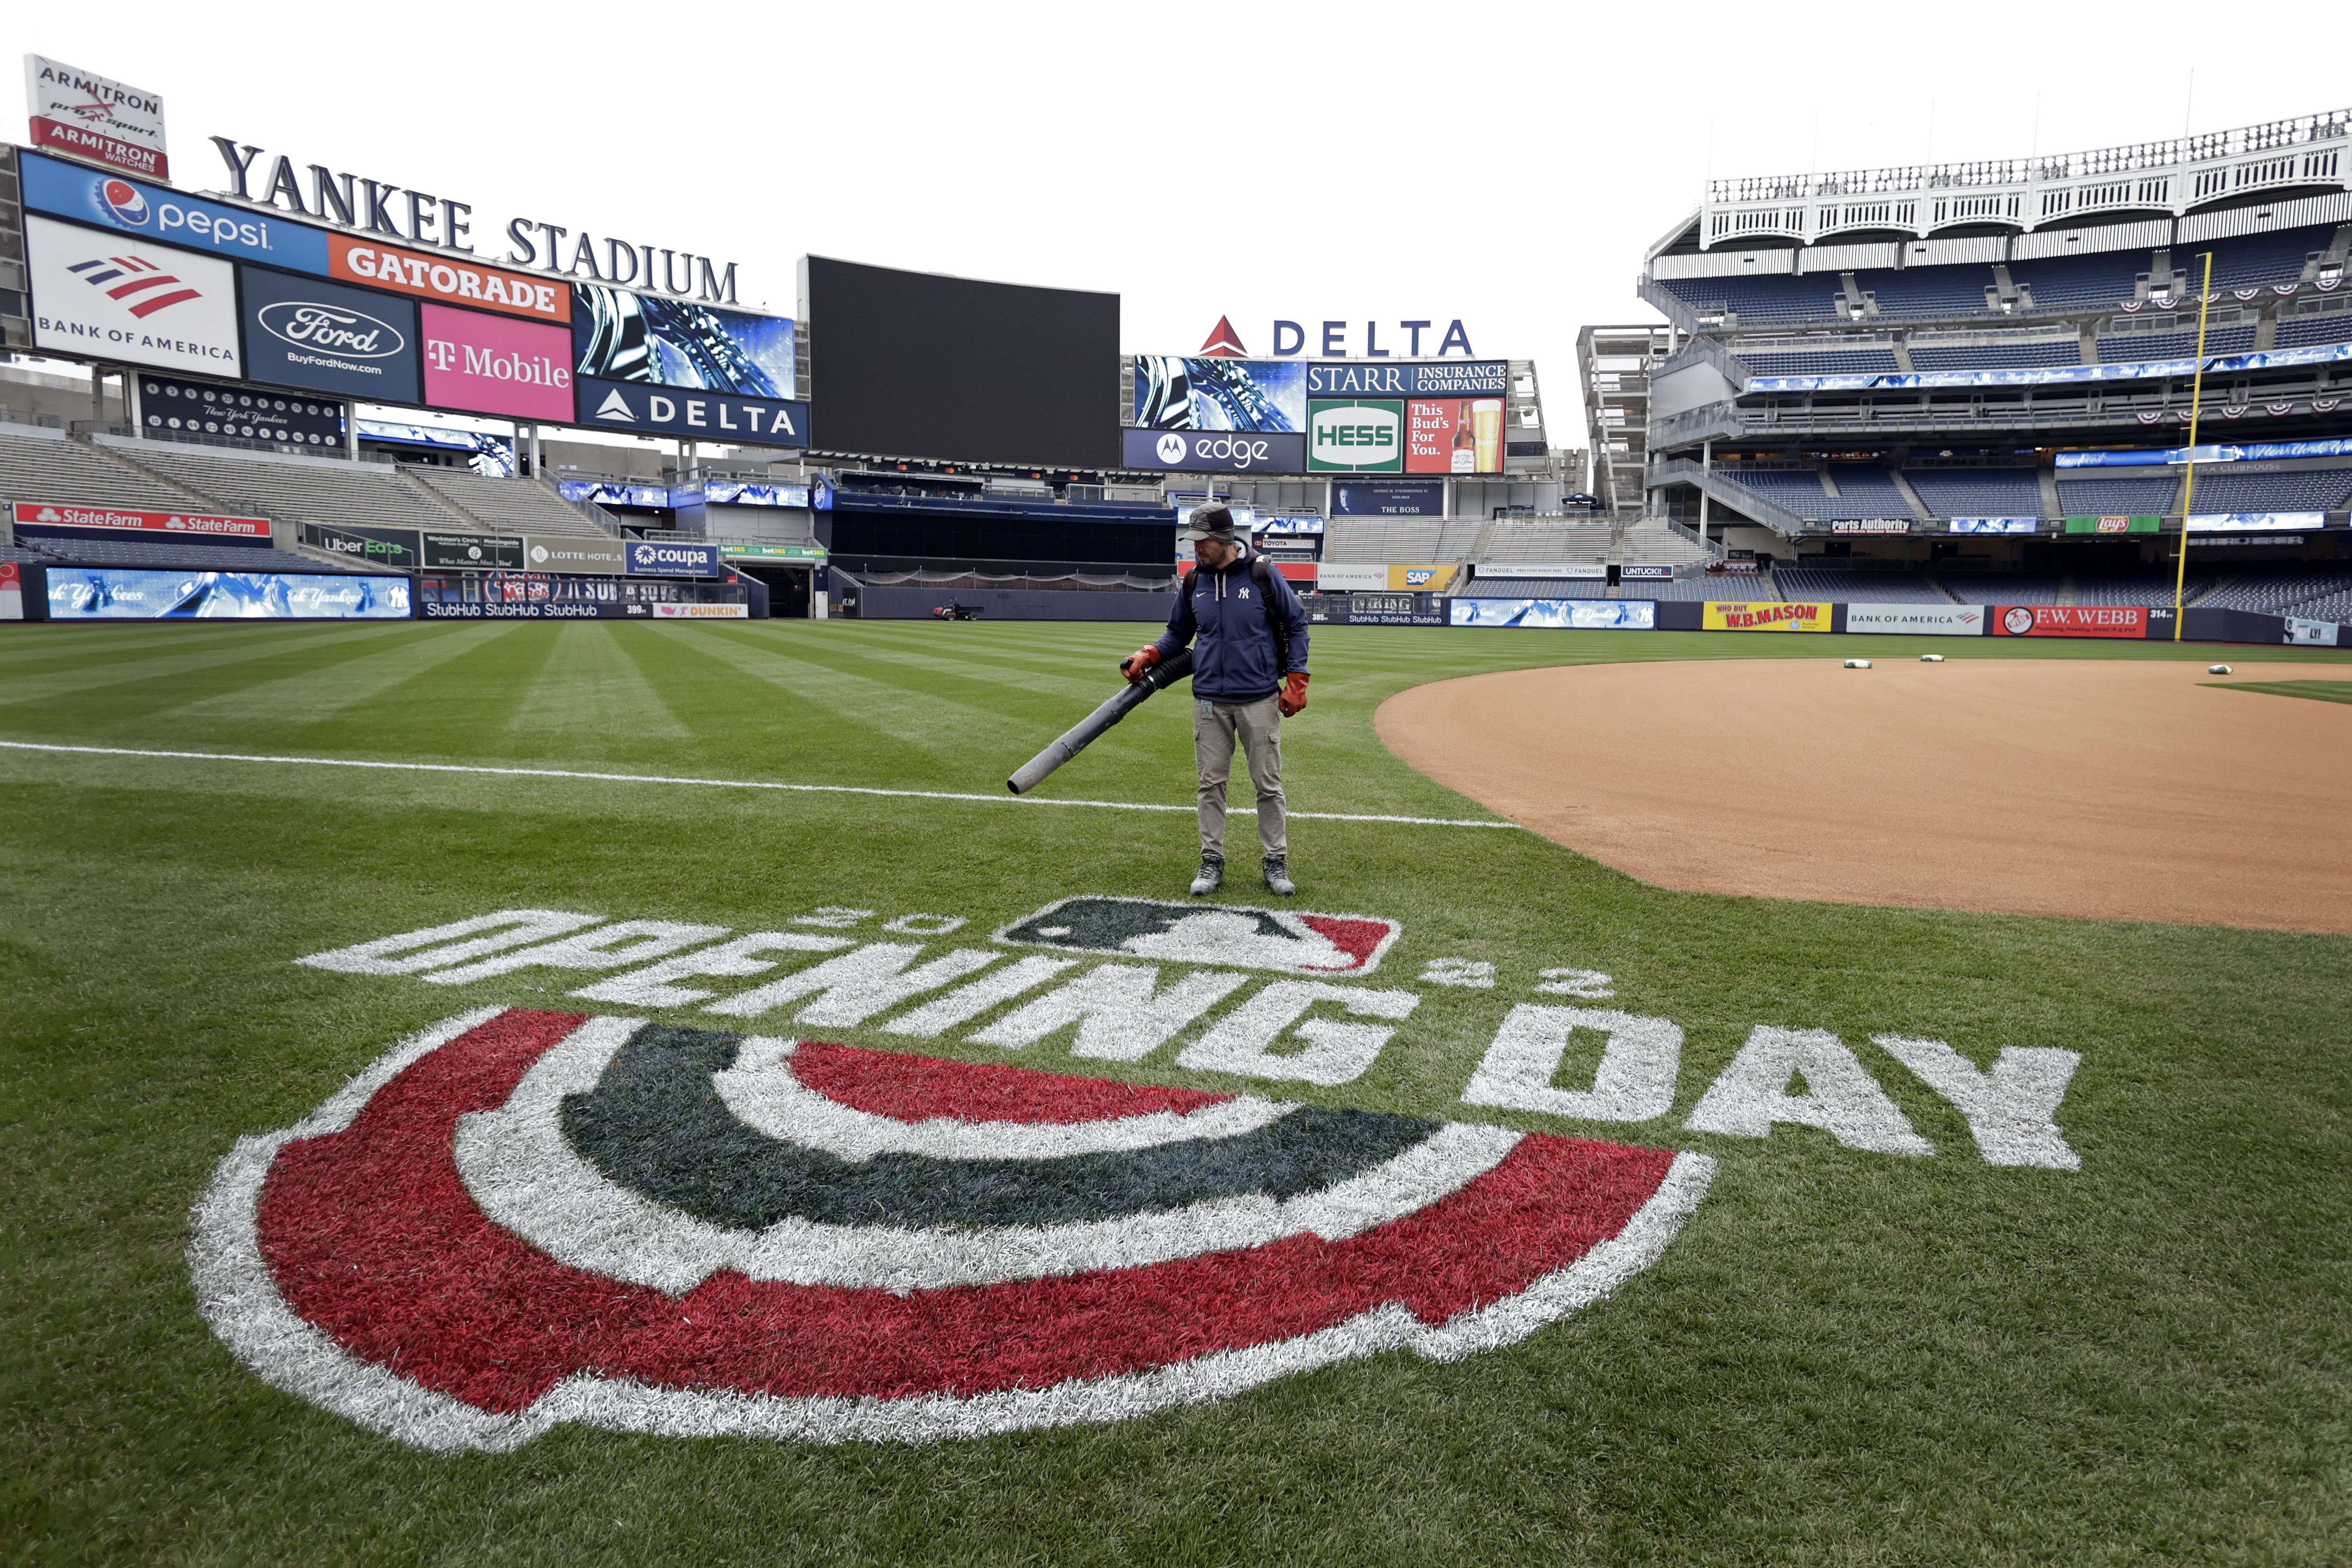 Yankees' Opening Day 2022: preview Yankees vs. Red Sox preview